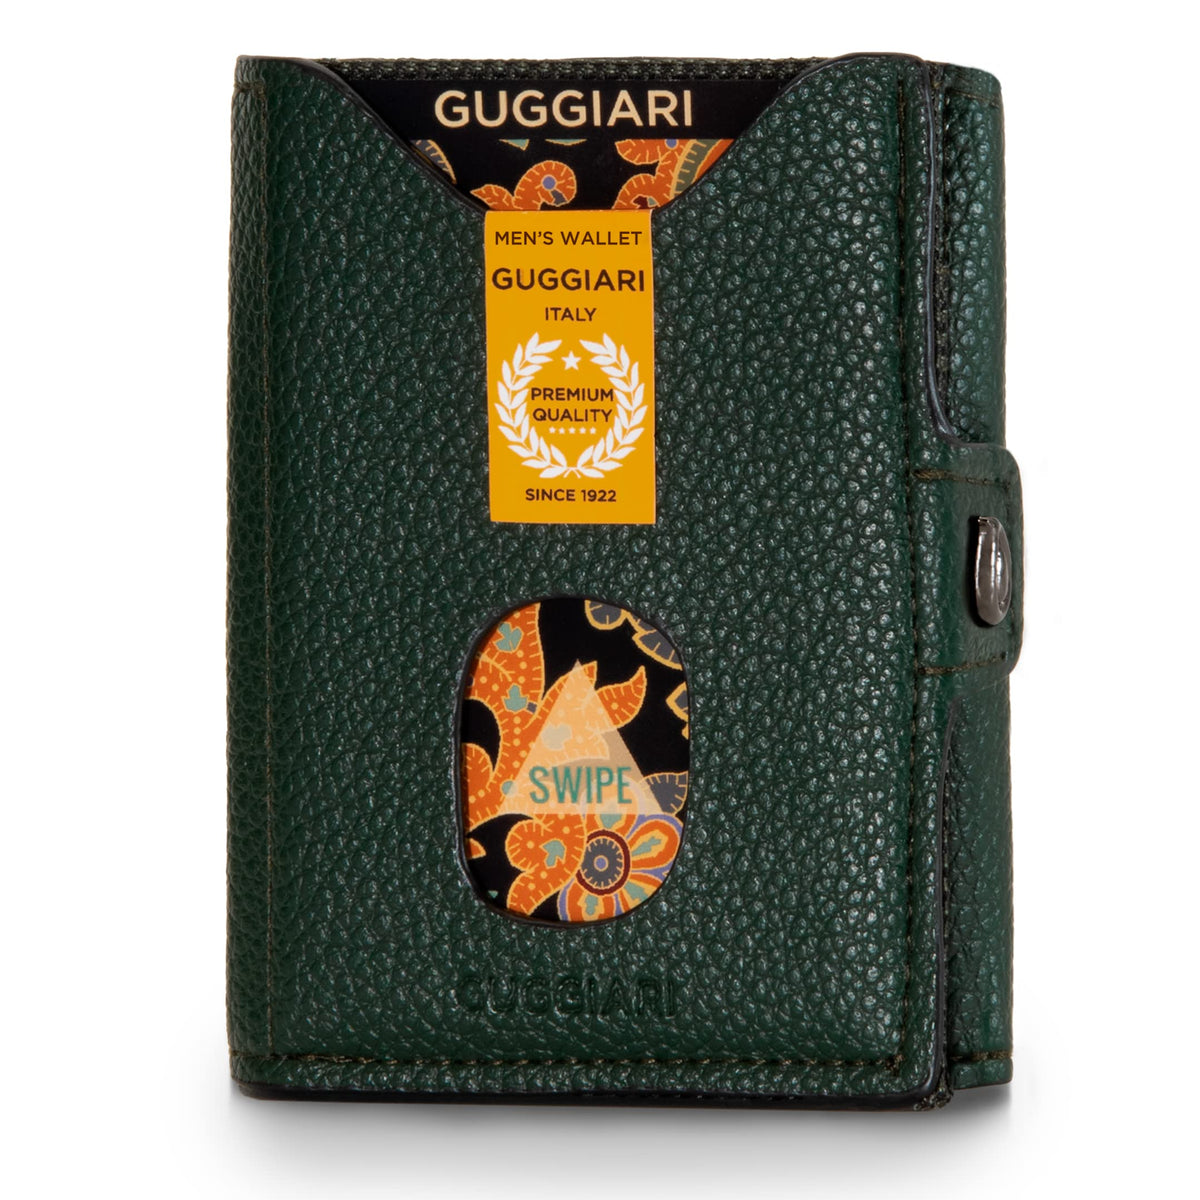 GUGGIARI Zen®Small Men's Wallet, Slim Men's Wallet with Credit Card Holder, Coin Holder and Cash-Compact Men's Credit Card Holder, Small Wallet, Men's Gift Idea-Bosco